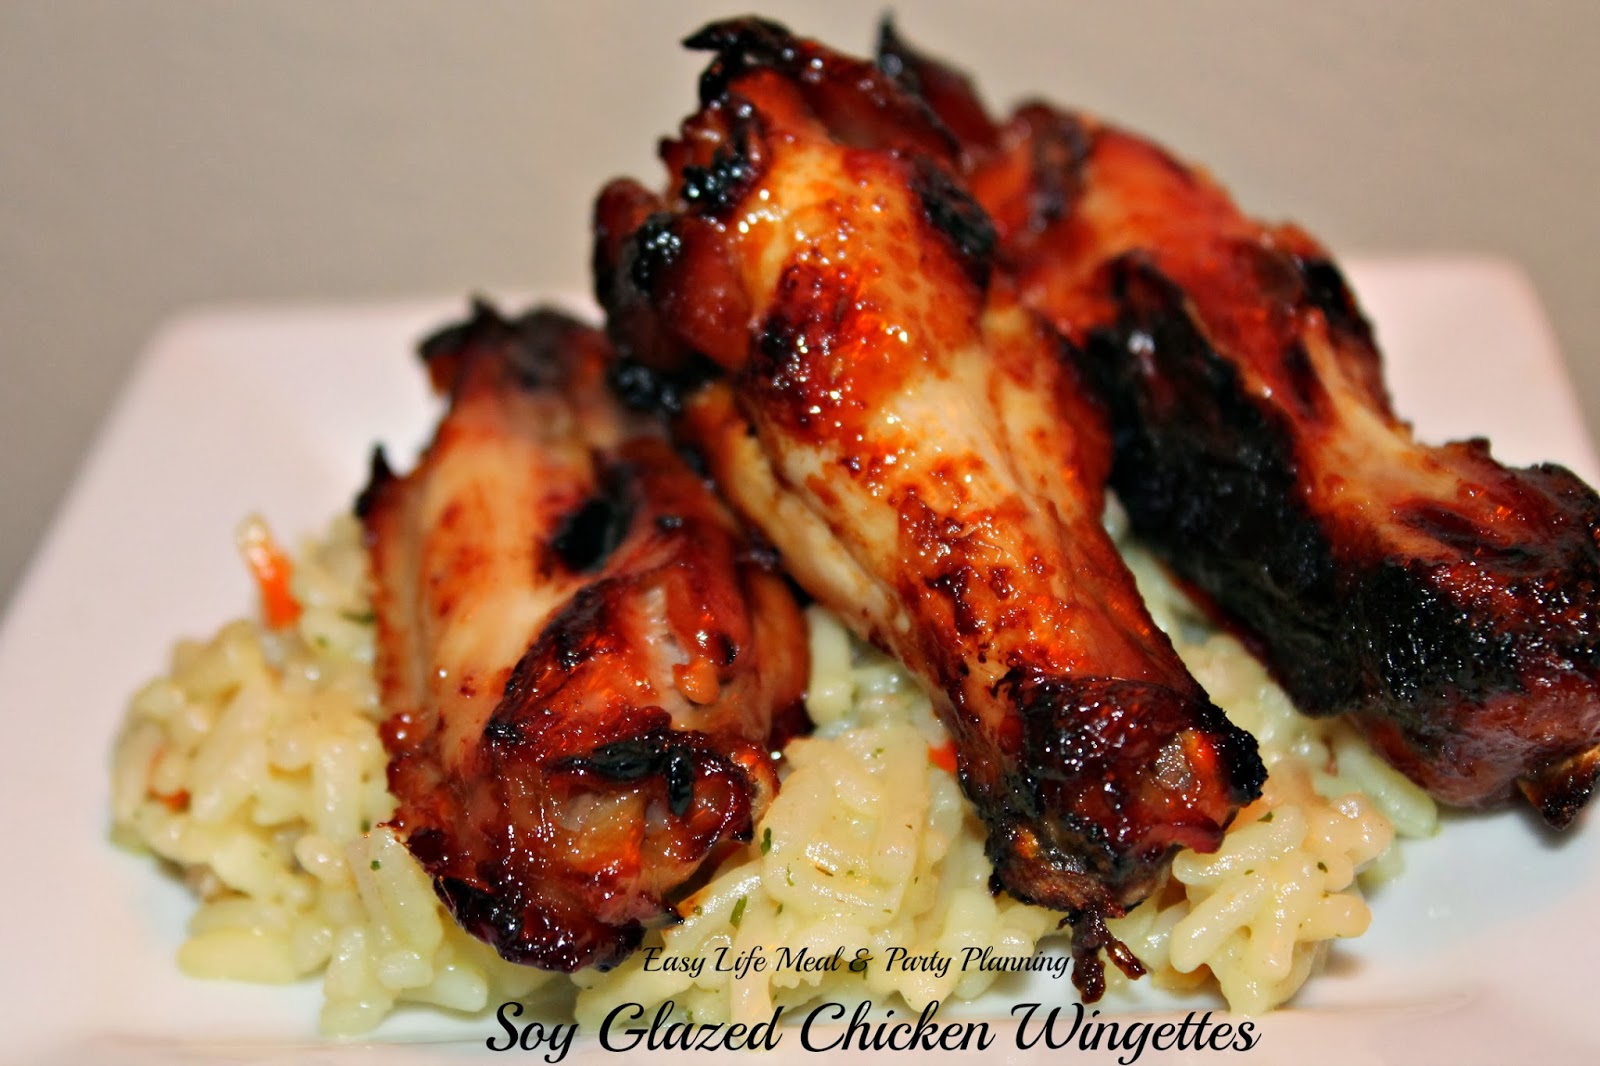 Soy Glazed Chicken Wingettes - Easy Life Meal & Party Planning - sweet, salty and slightly spicy with a hint of sesame